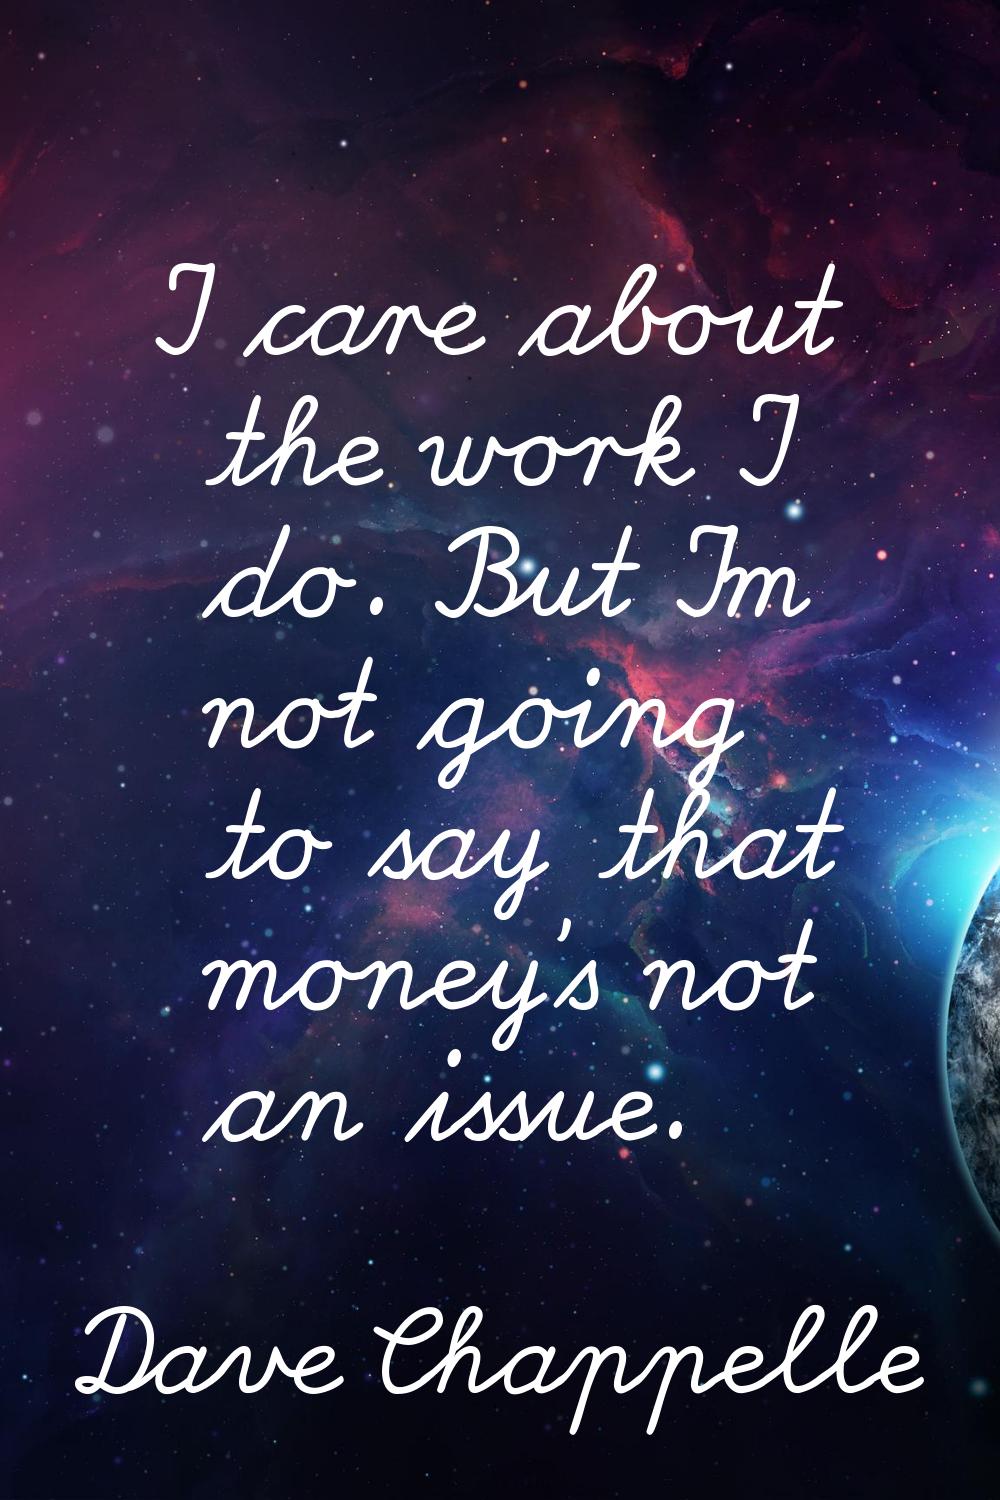 I care about the work I do. But I'm not going to say that money's not an issue.